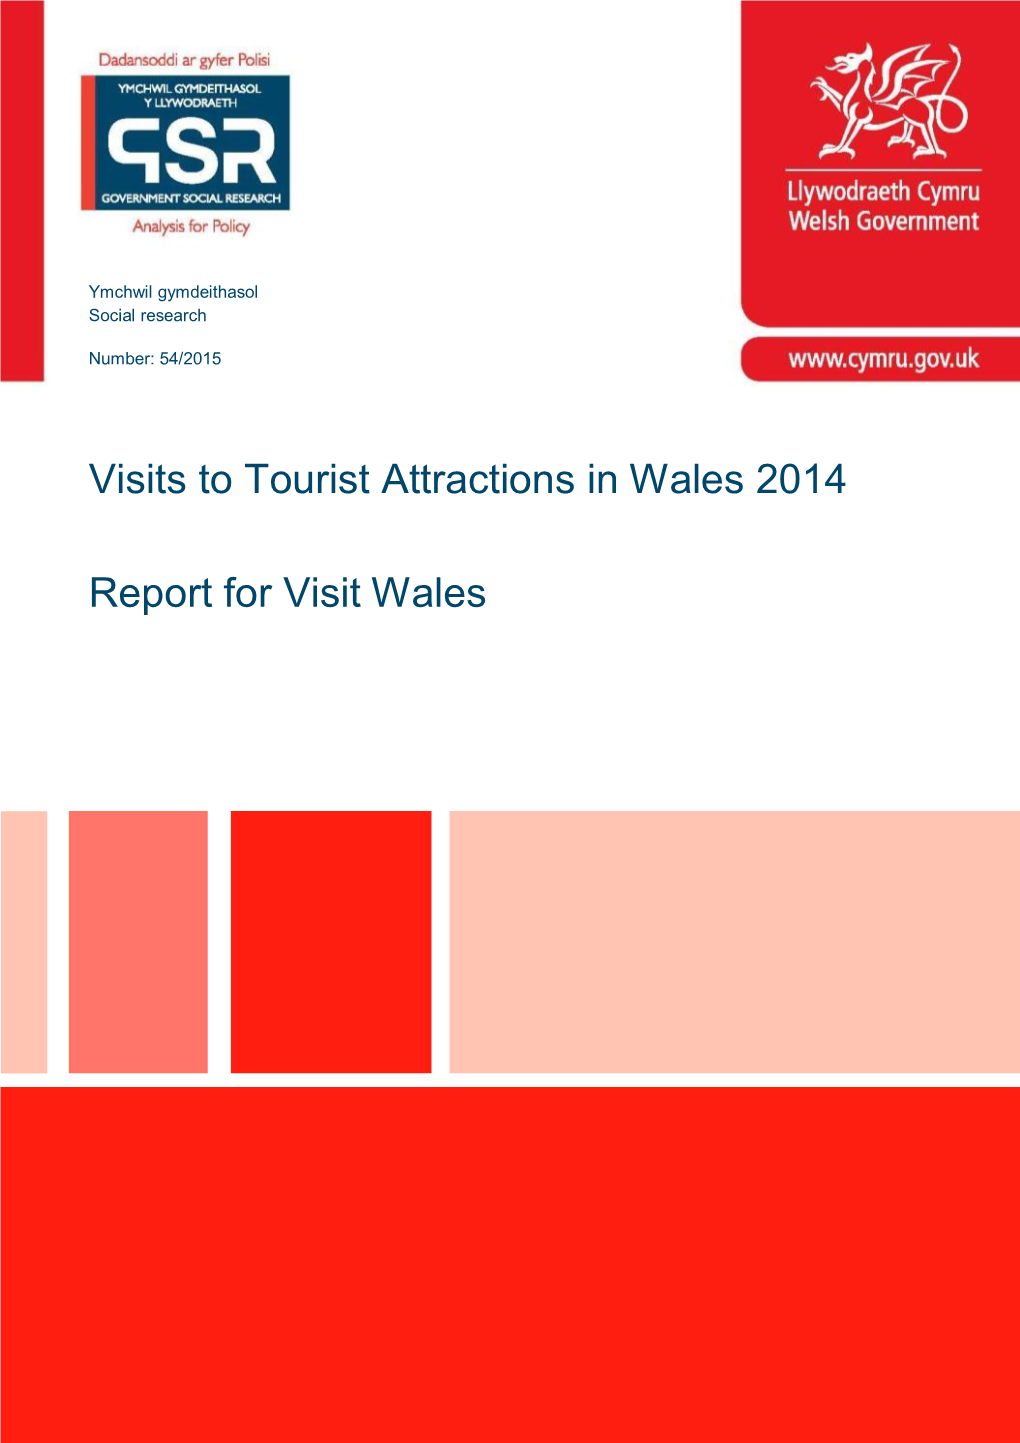 Visits to Tourist Attractions in Wales 2014